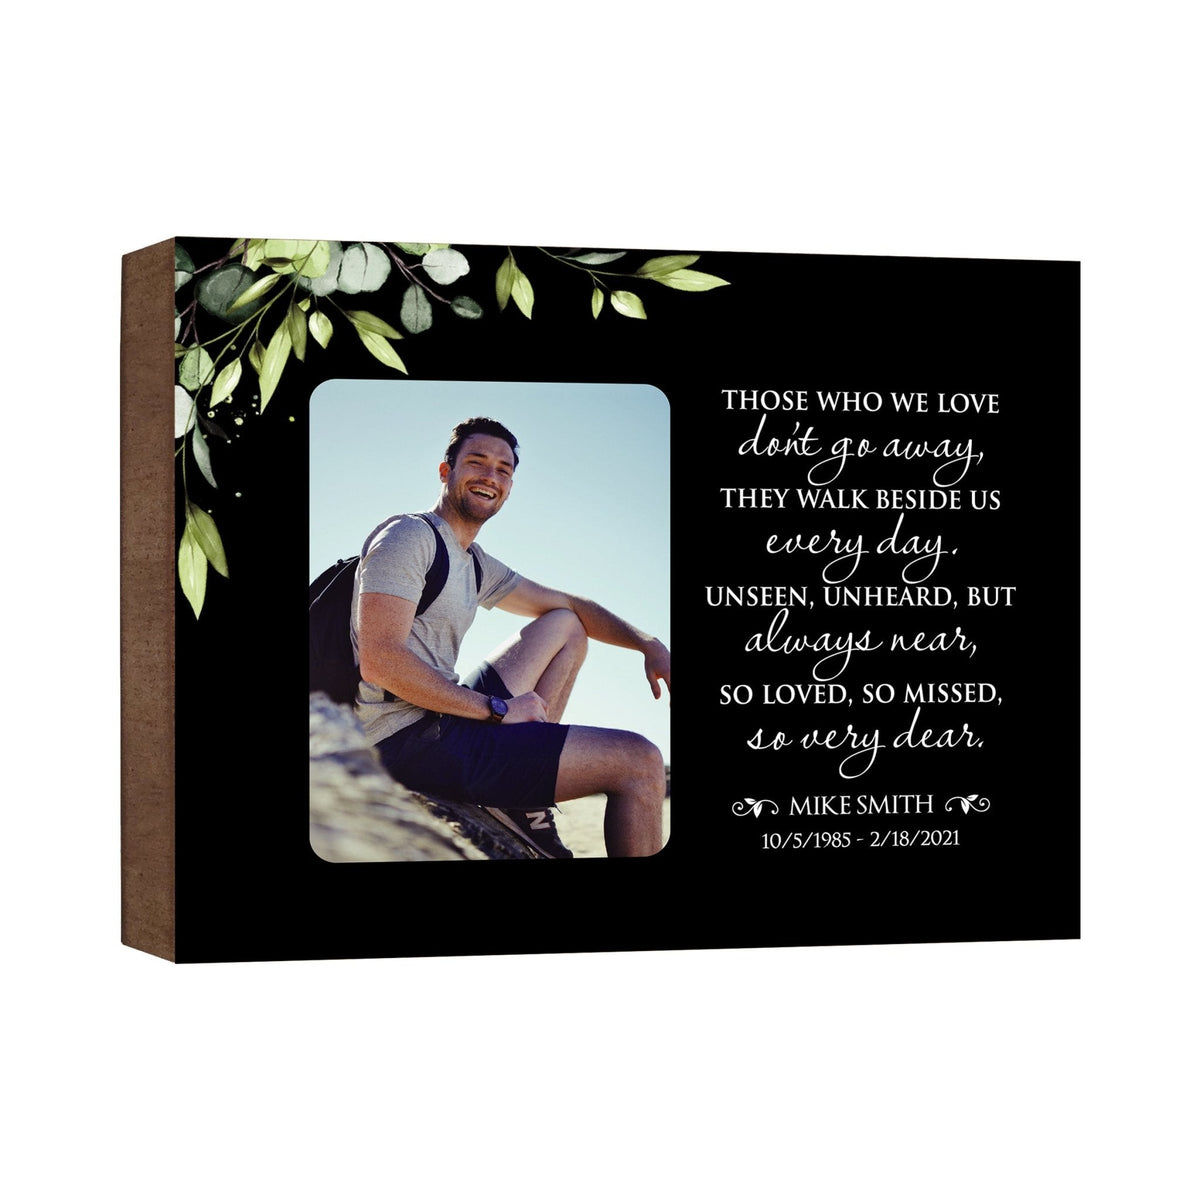 Personalized Human Memorial Black Photo &amp; Inspirational Verse Bereavement Wall Décor &amp; Sympathy Gift Ideas - Those Who We Love - LifeSong Milestones